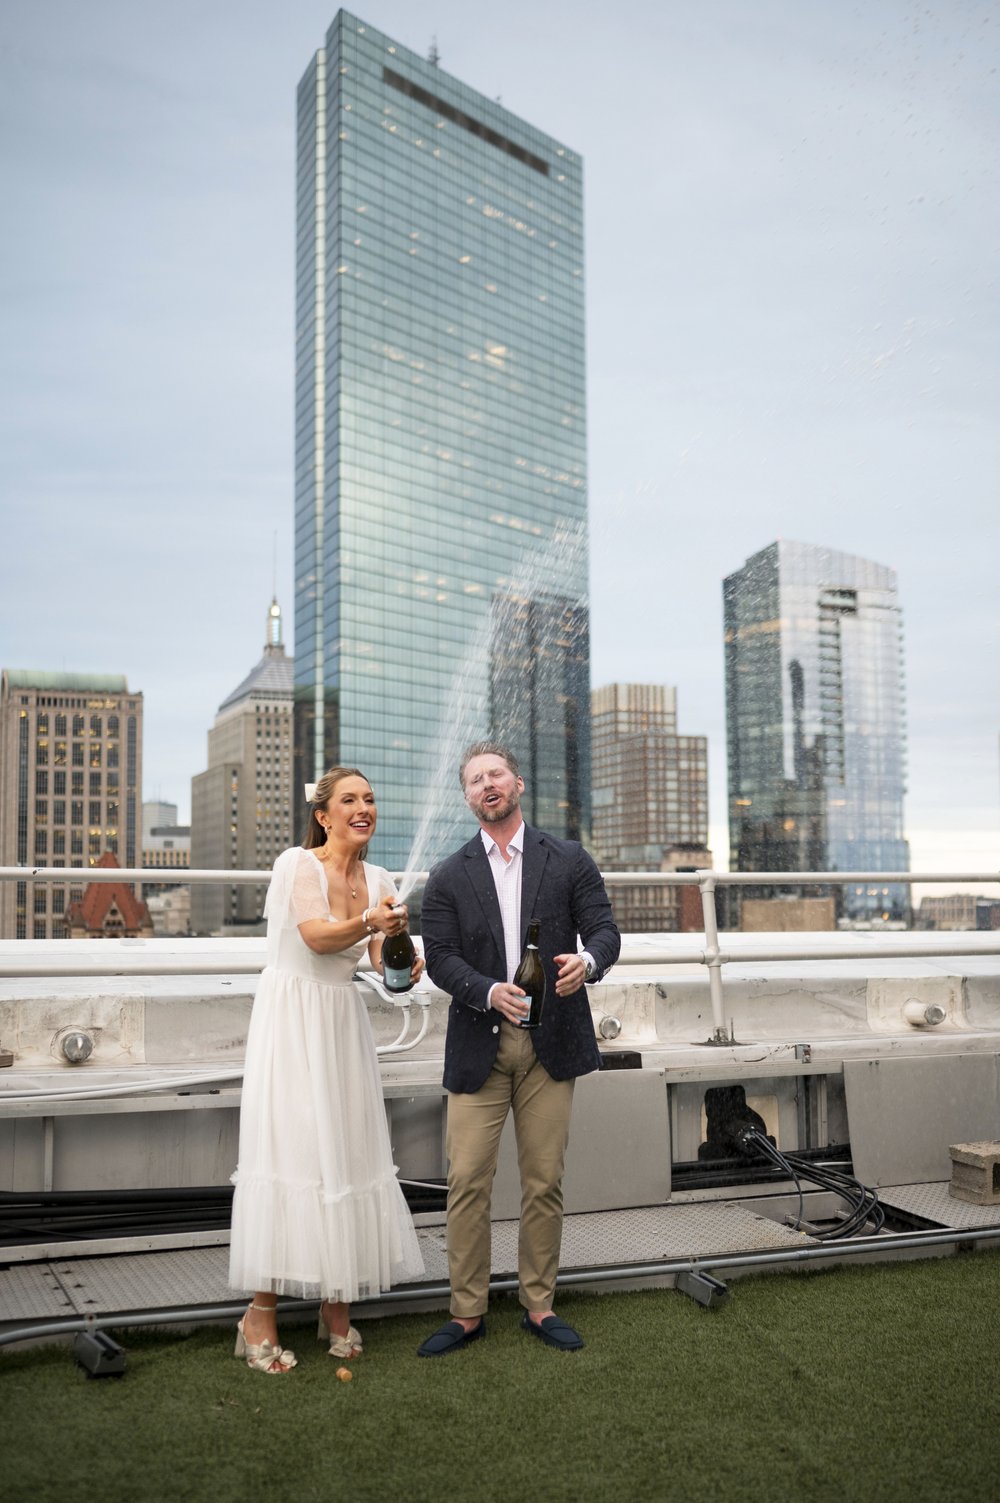 Rooftop Engagement Photos